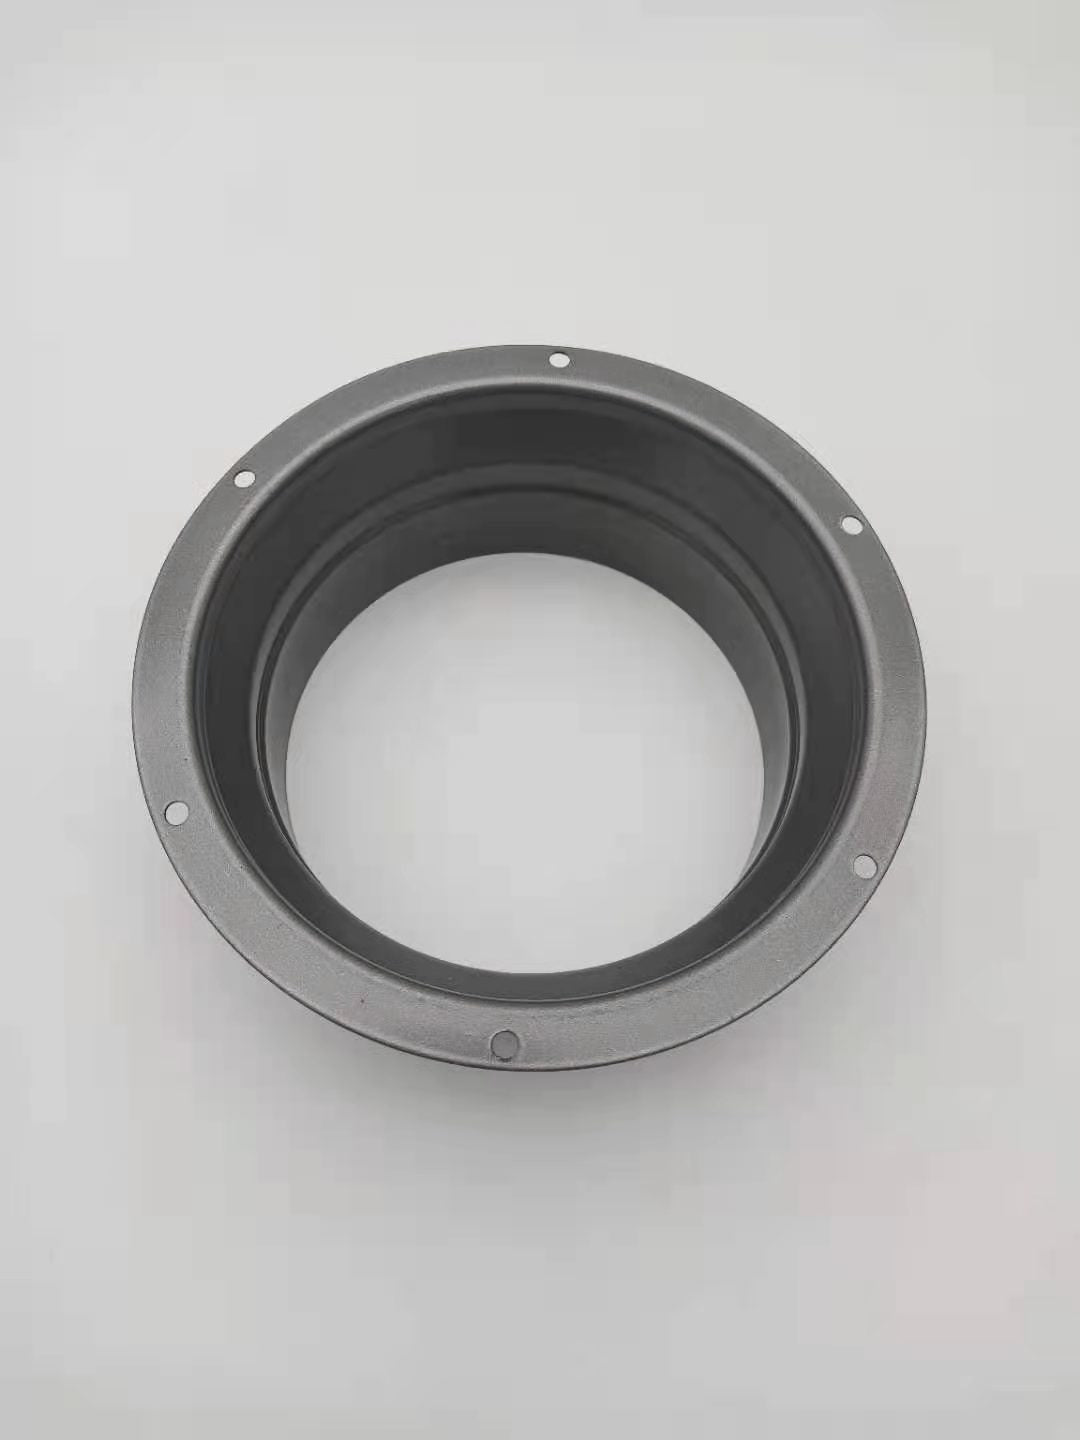 New Air System Flange Interface 75, Black Plastic Straight Dryer Vent Wall Plate Wall Trim Pipe Collar, for Heating Cooling Ventilation System